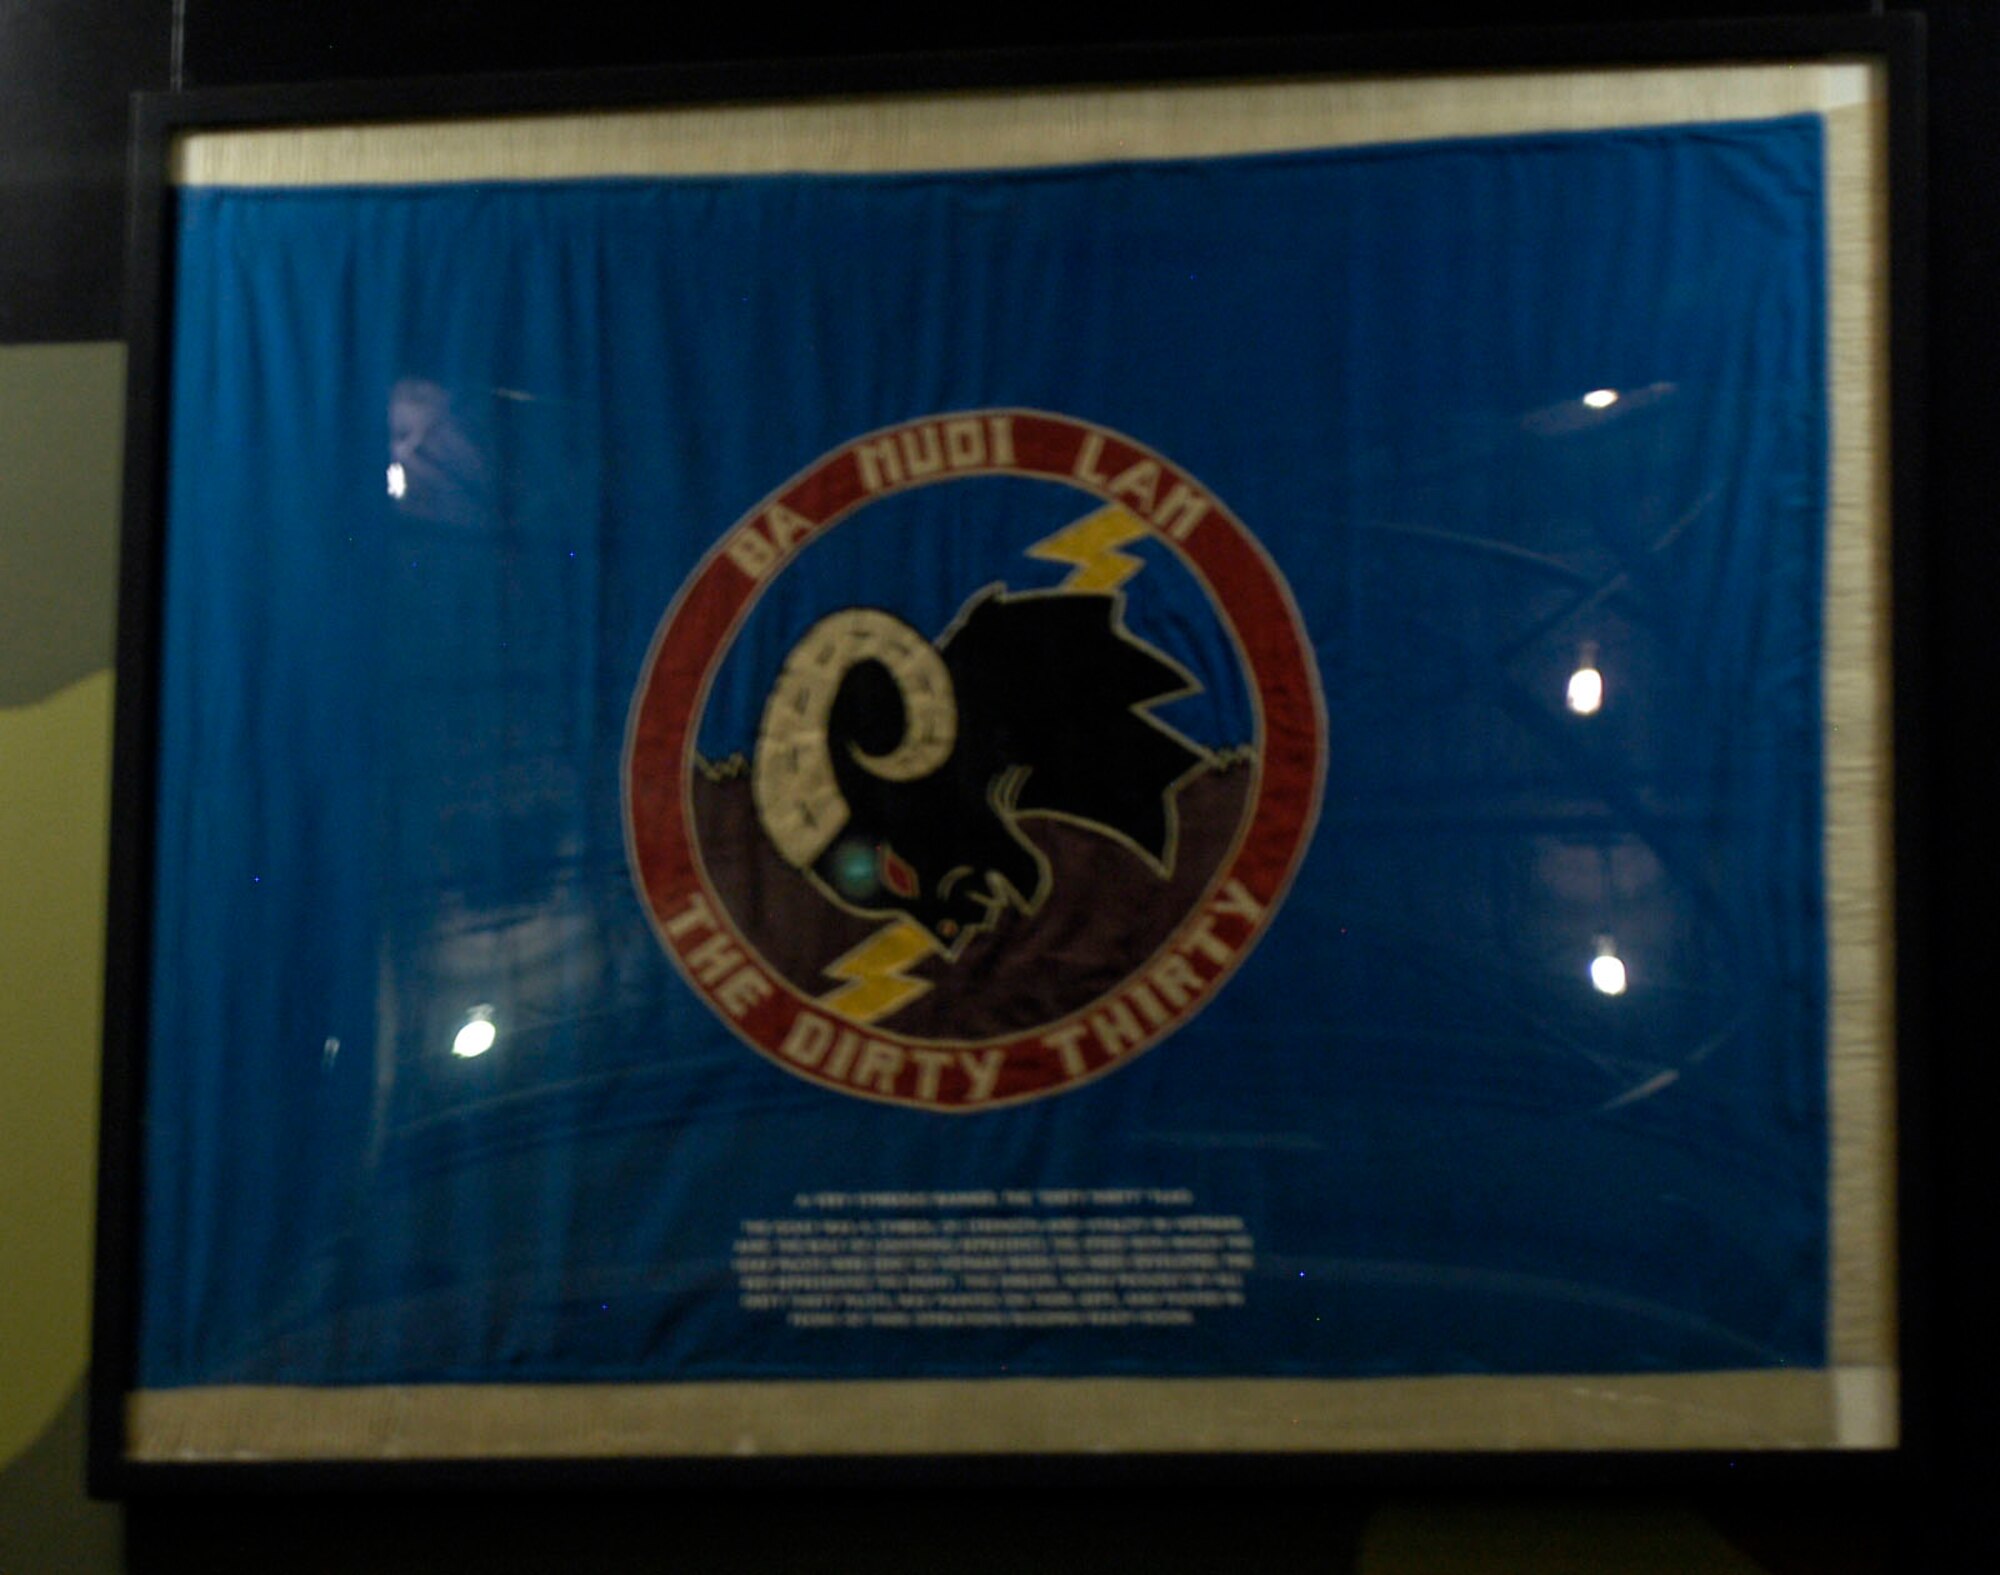 DAYTON, Ohio - The goat was a symbol of strength and vitality in Vietnam and the bolt of lightning represents the speed with which the USAF pilots were sent to Vietnam when the need developed. The red represented the enemy. This emblem, worn proudly by all "Dirty Thirty" pilots, was painted on their jeeps and posted in front of their operations ready-room. This flag is on display in the Southeast Asia War Gallery at the National Museum of the U.S. Air Force. (U.S. Air Force photo)